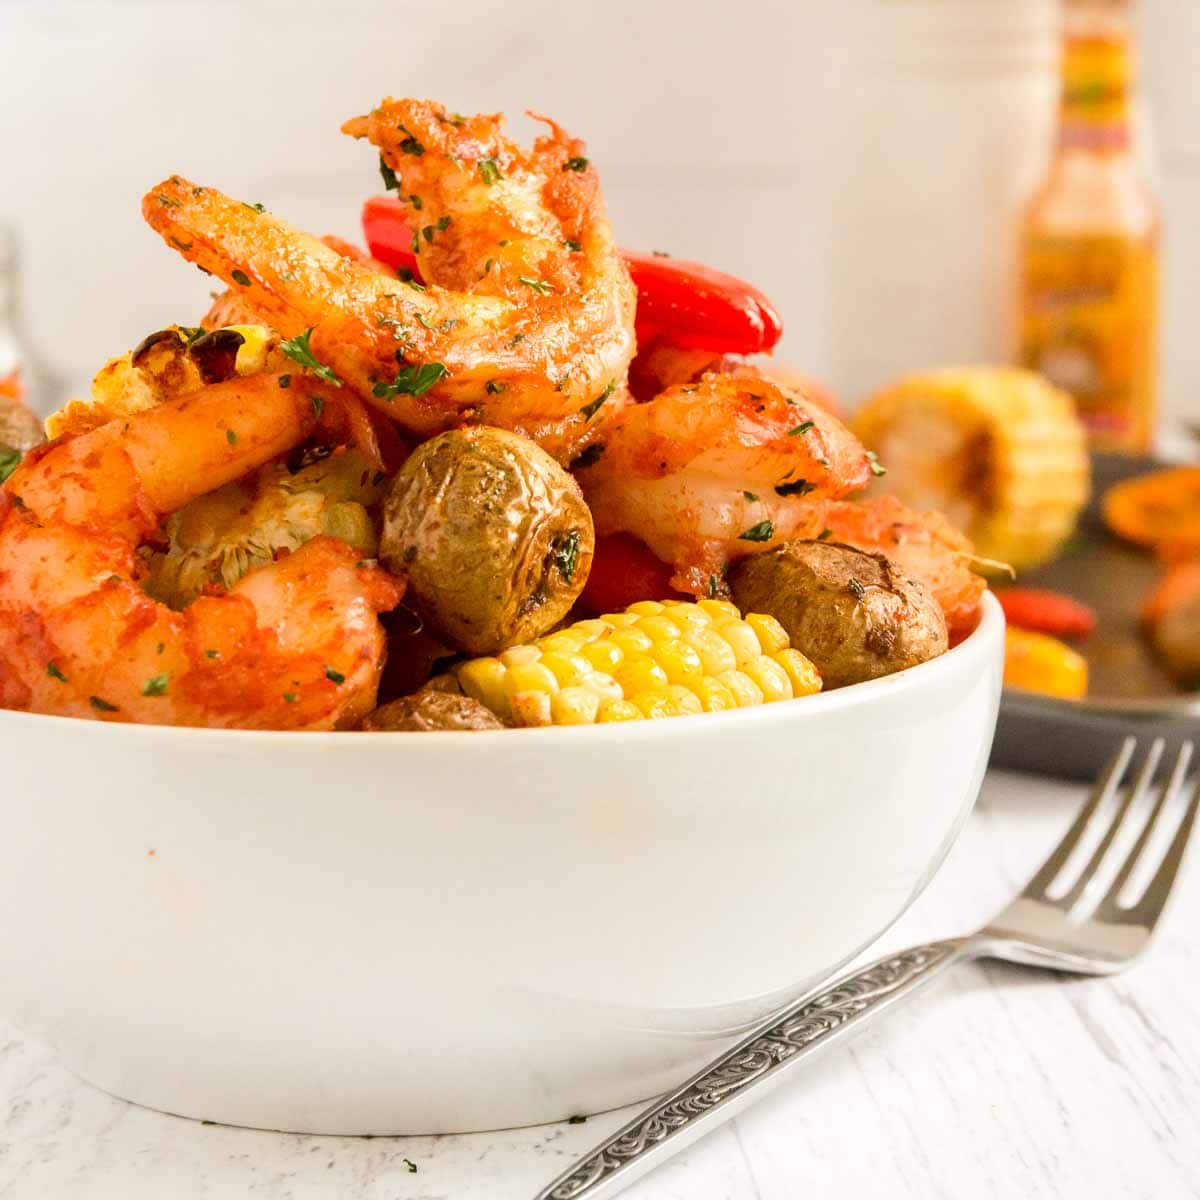 Cajun shrimp with potatoes and carrots served in a white bowl.